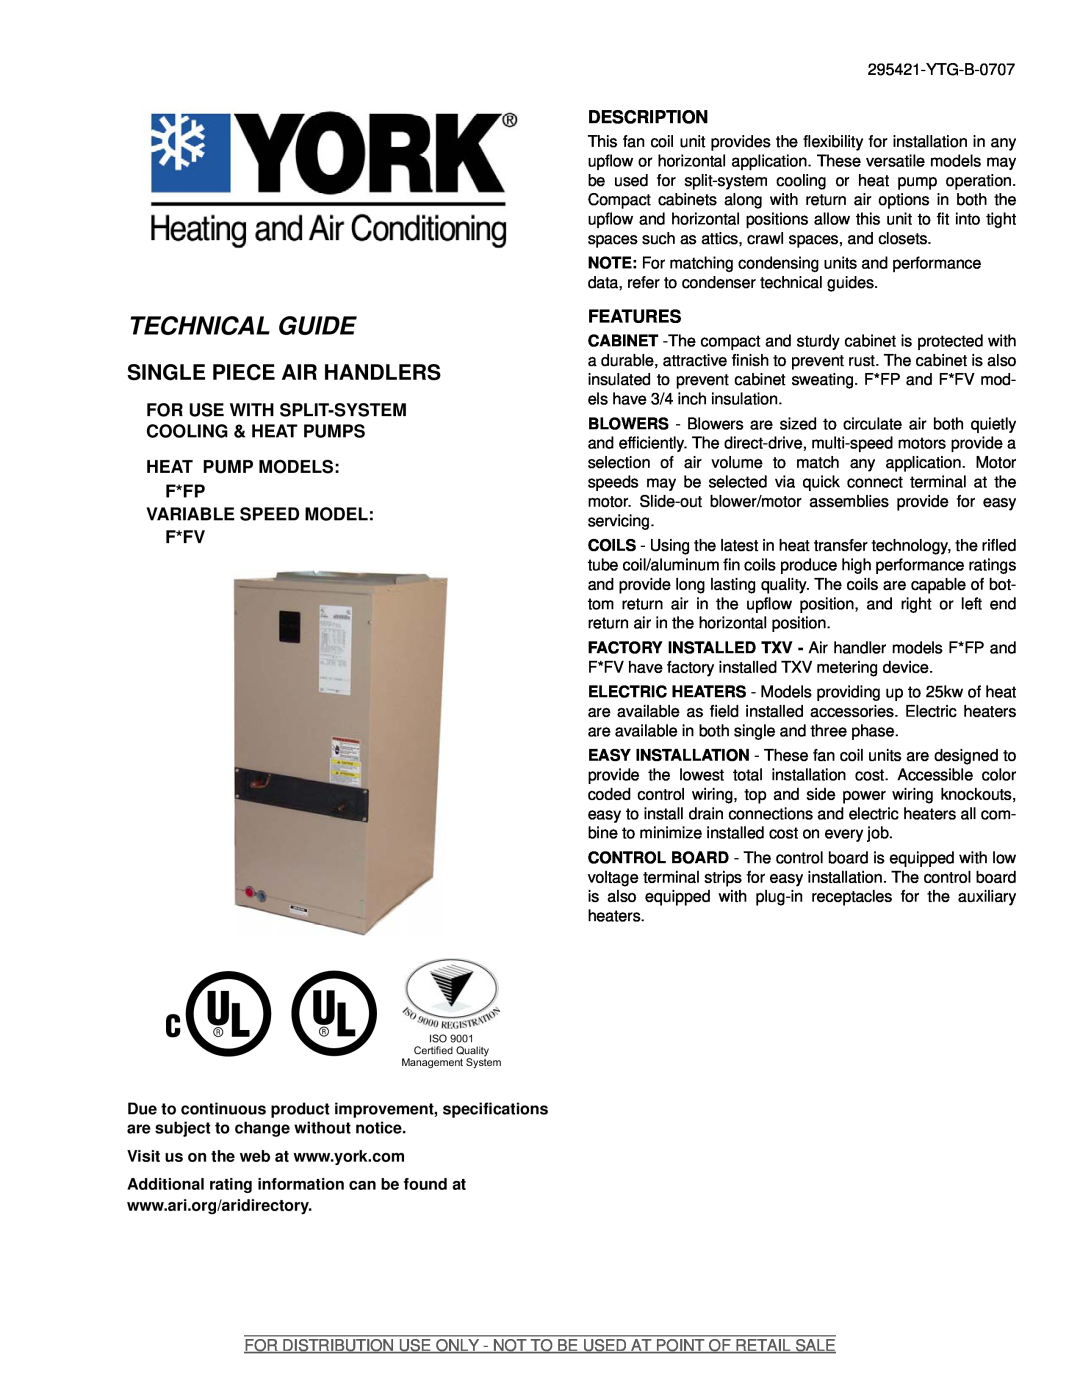 York F*FV specifications For Use With Split-Systemcooling & Heat Pumps, Heat Pump Models F*Fp Variable Speed Model F*Fv 